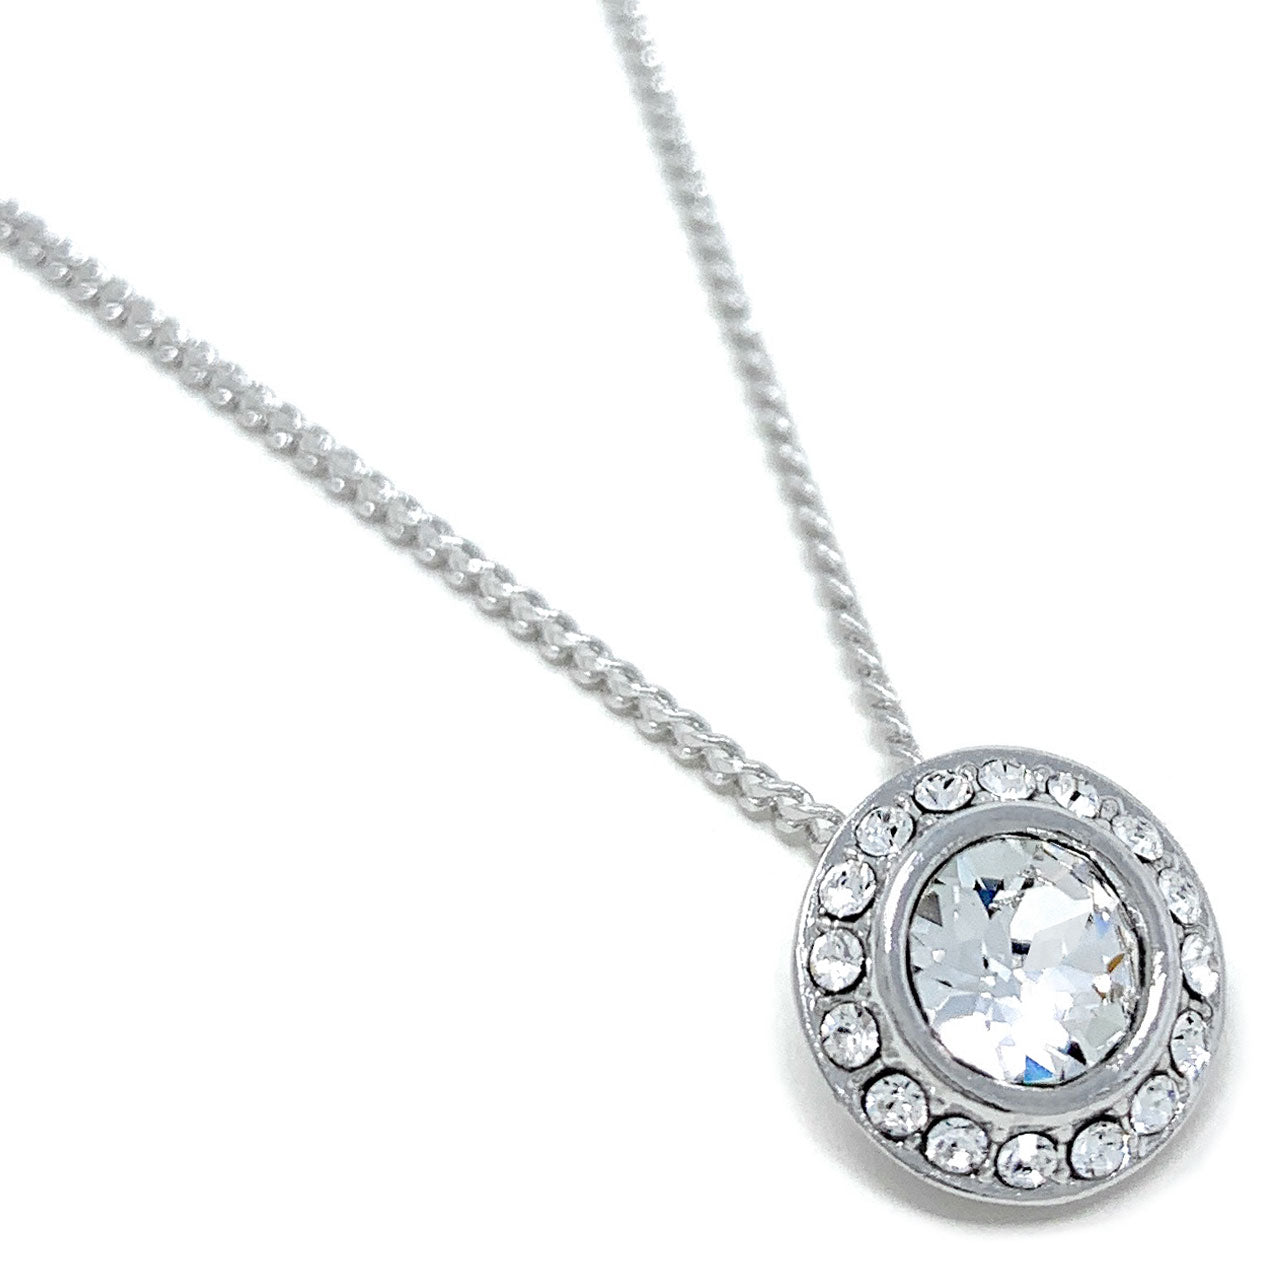 Halo Pave Pendant Necklace with White Clear Round Crystals from Swarovski Silver Toned Rhodium Plated - Ed Heart